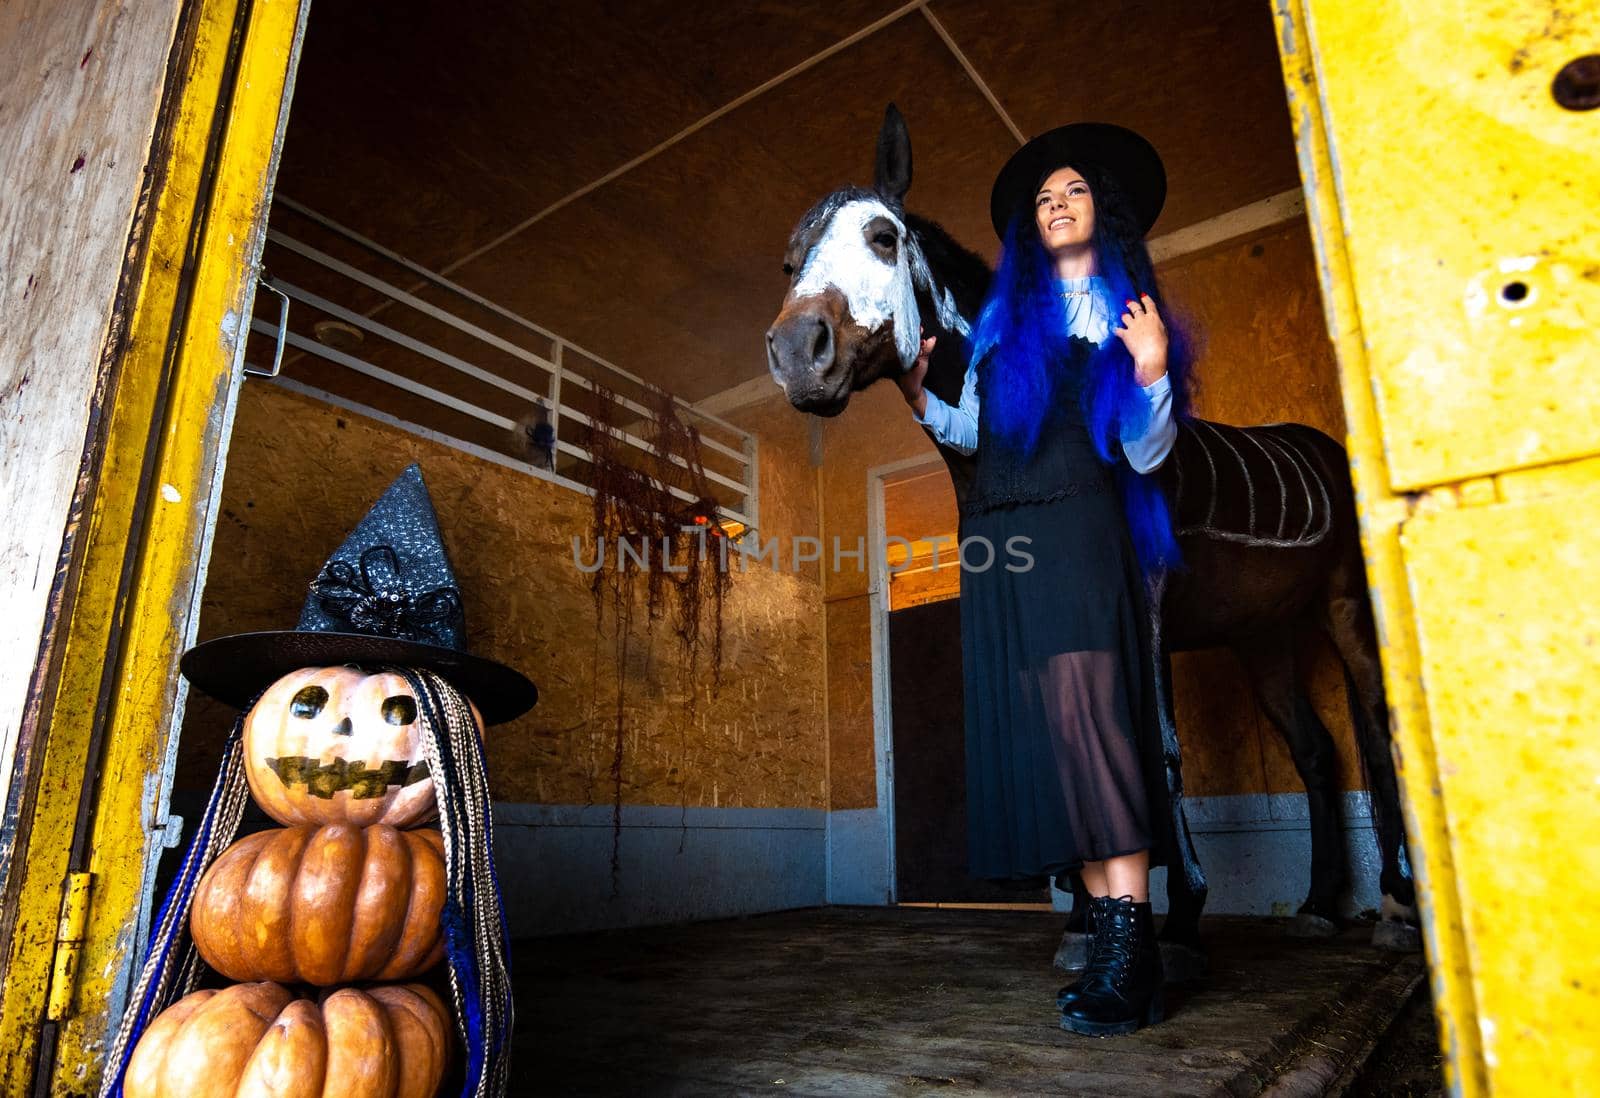 A girl dressed as a witch comes out of the corral with a horse, in the foreground an evil figure of pumpkins